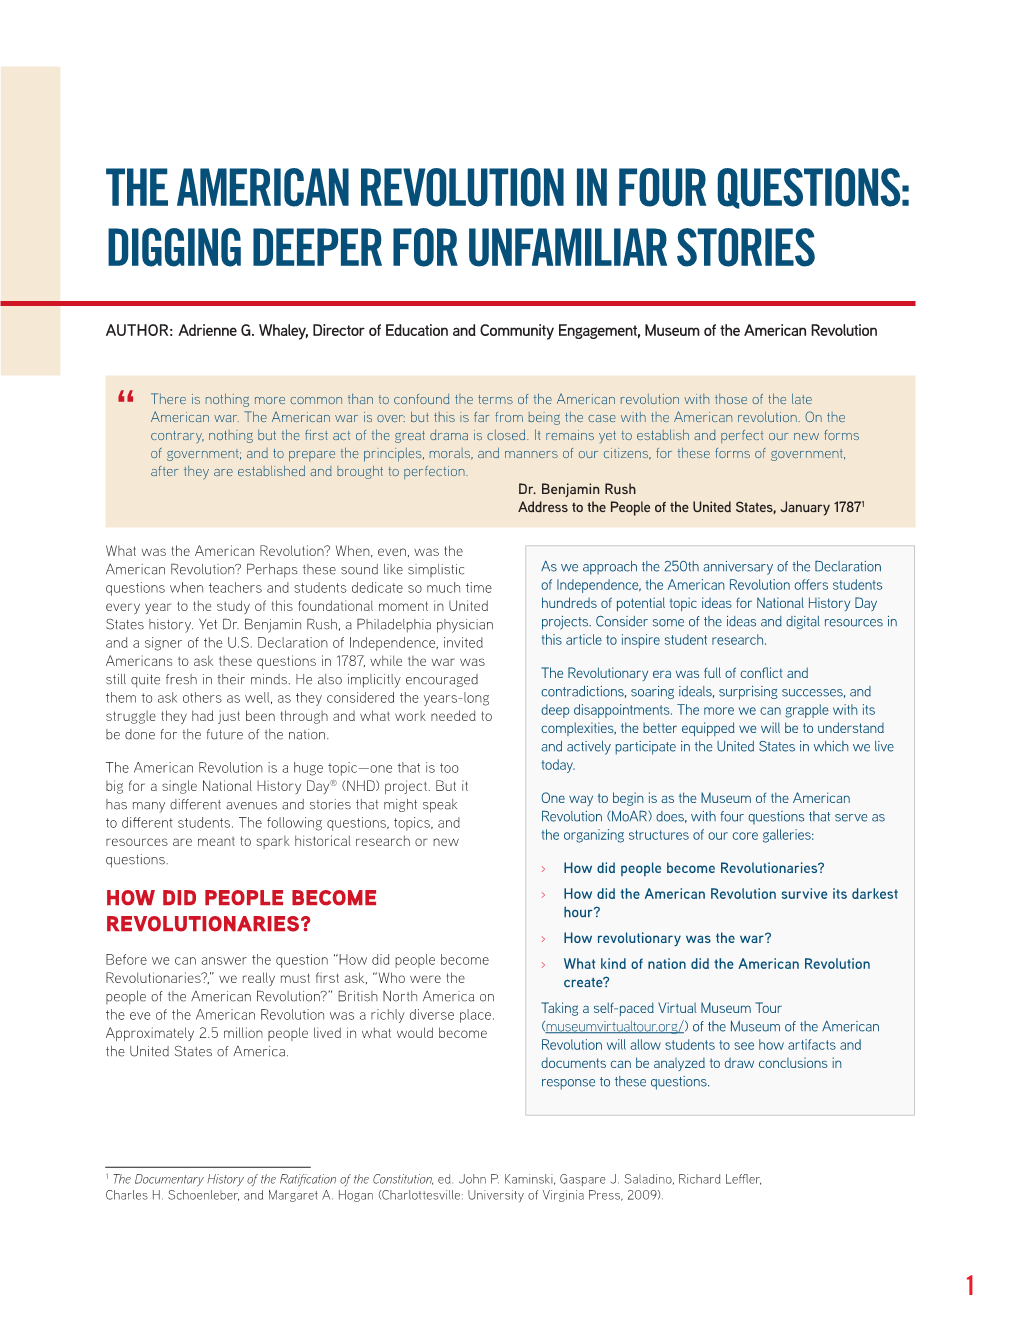 The American Revolution in Four Questions: Digging Deeper for Unfamiliar Stories